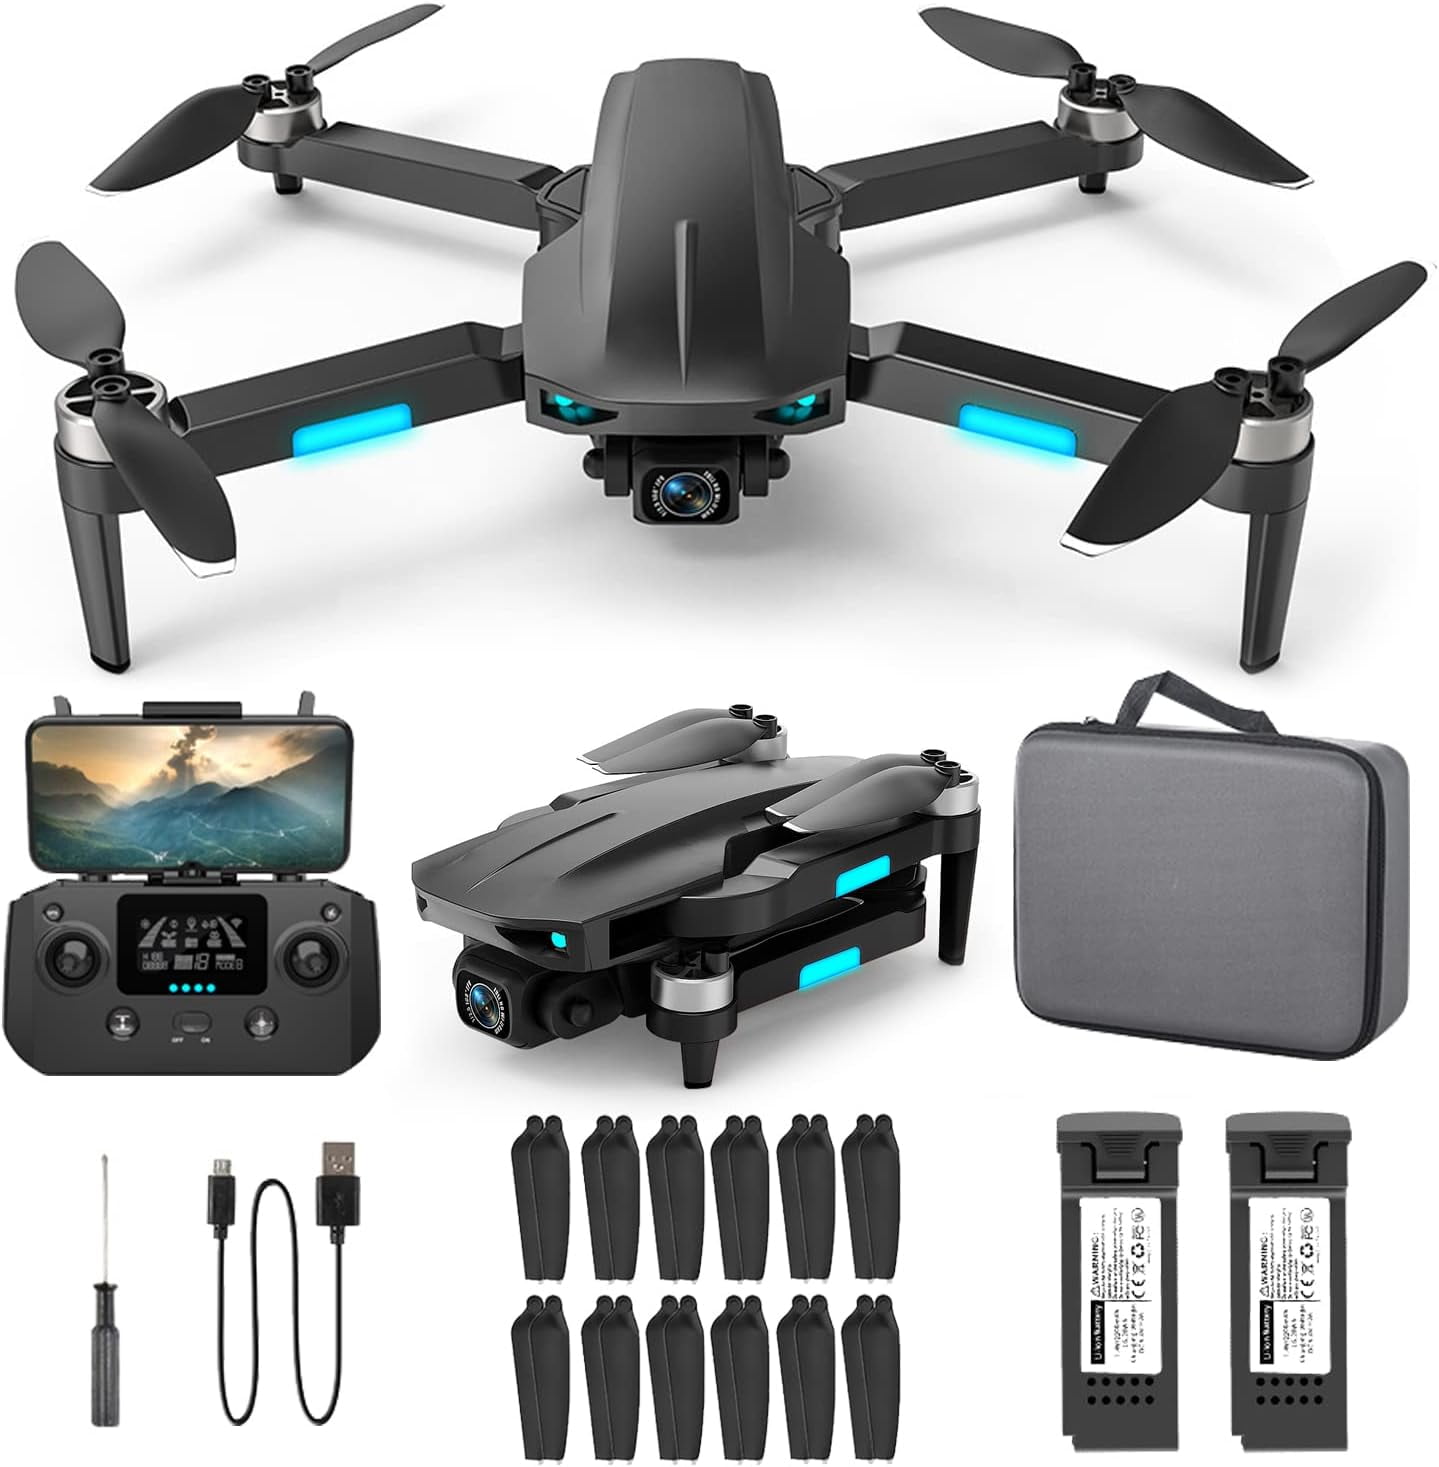  DJI Air 3 Fly More Combo with DJI RC 2 Controller Drone with 4K  HDR, 46-Min Max Flight Time, 48MP CP.MA.00000693.01 Bundle with 128GB  Memory, Landing Pad + More : Toys